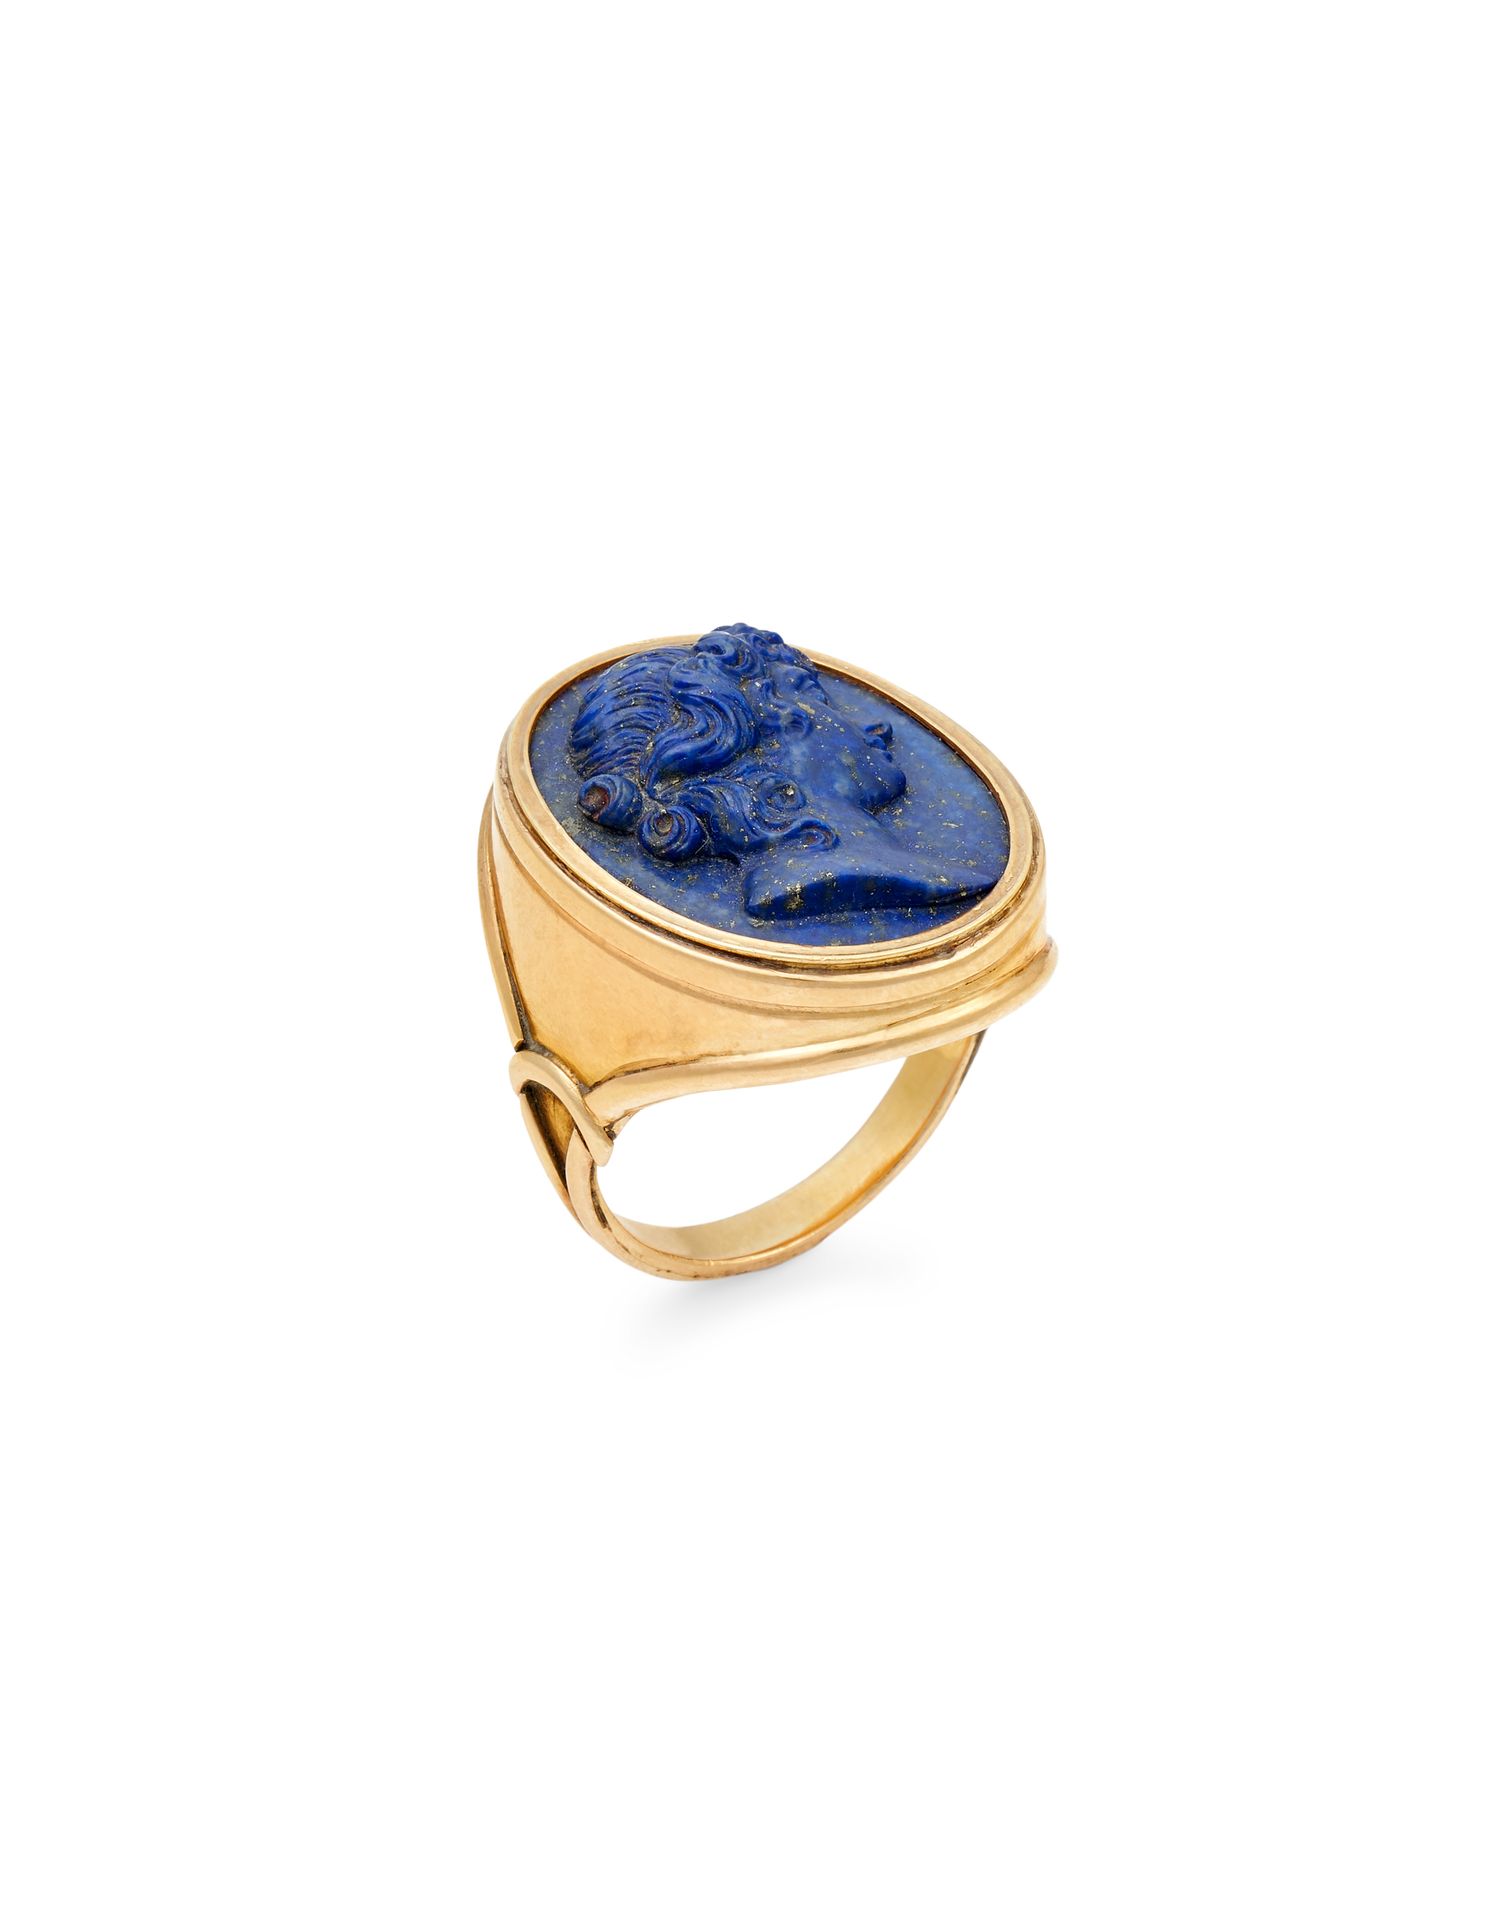 Null LAPIS- LAZULI CAMEO RINGS In 18K yellow gold, set with alapis-lazuli cameo &hellip;